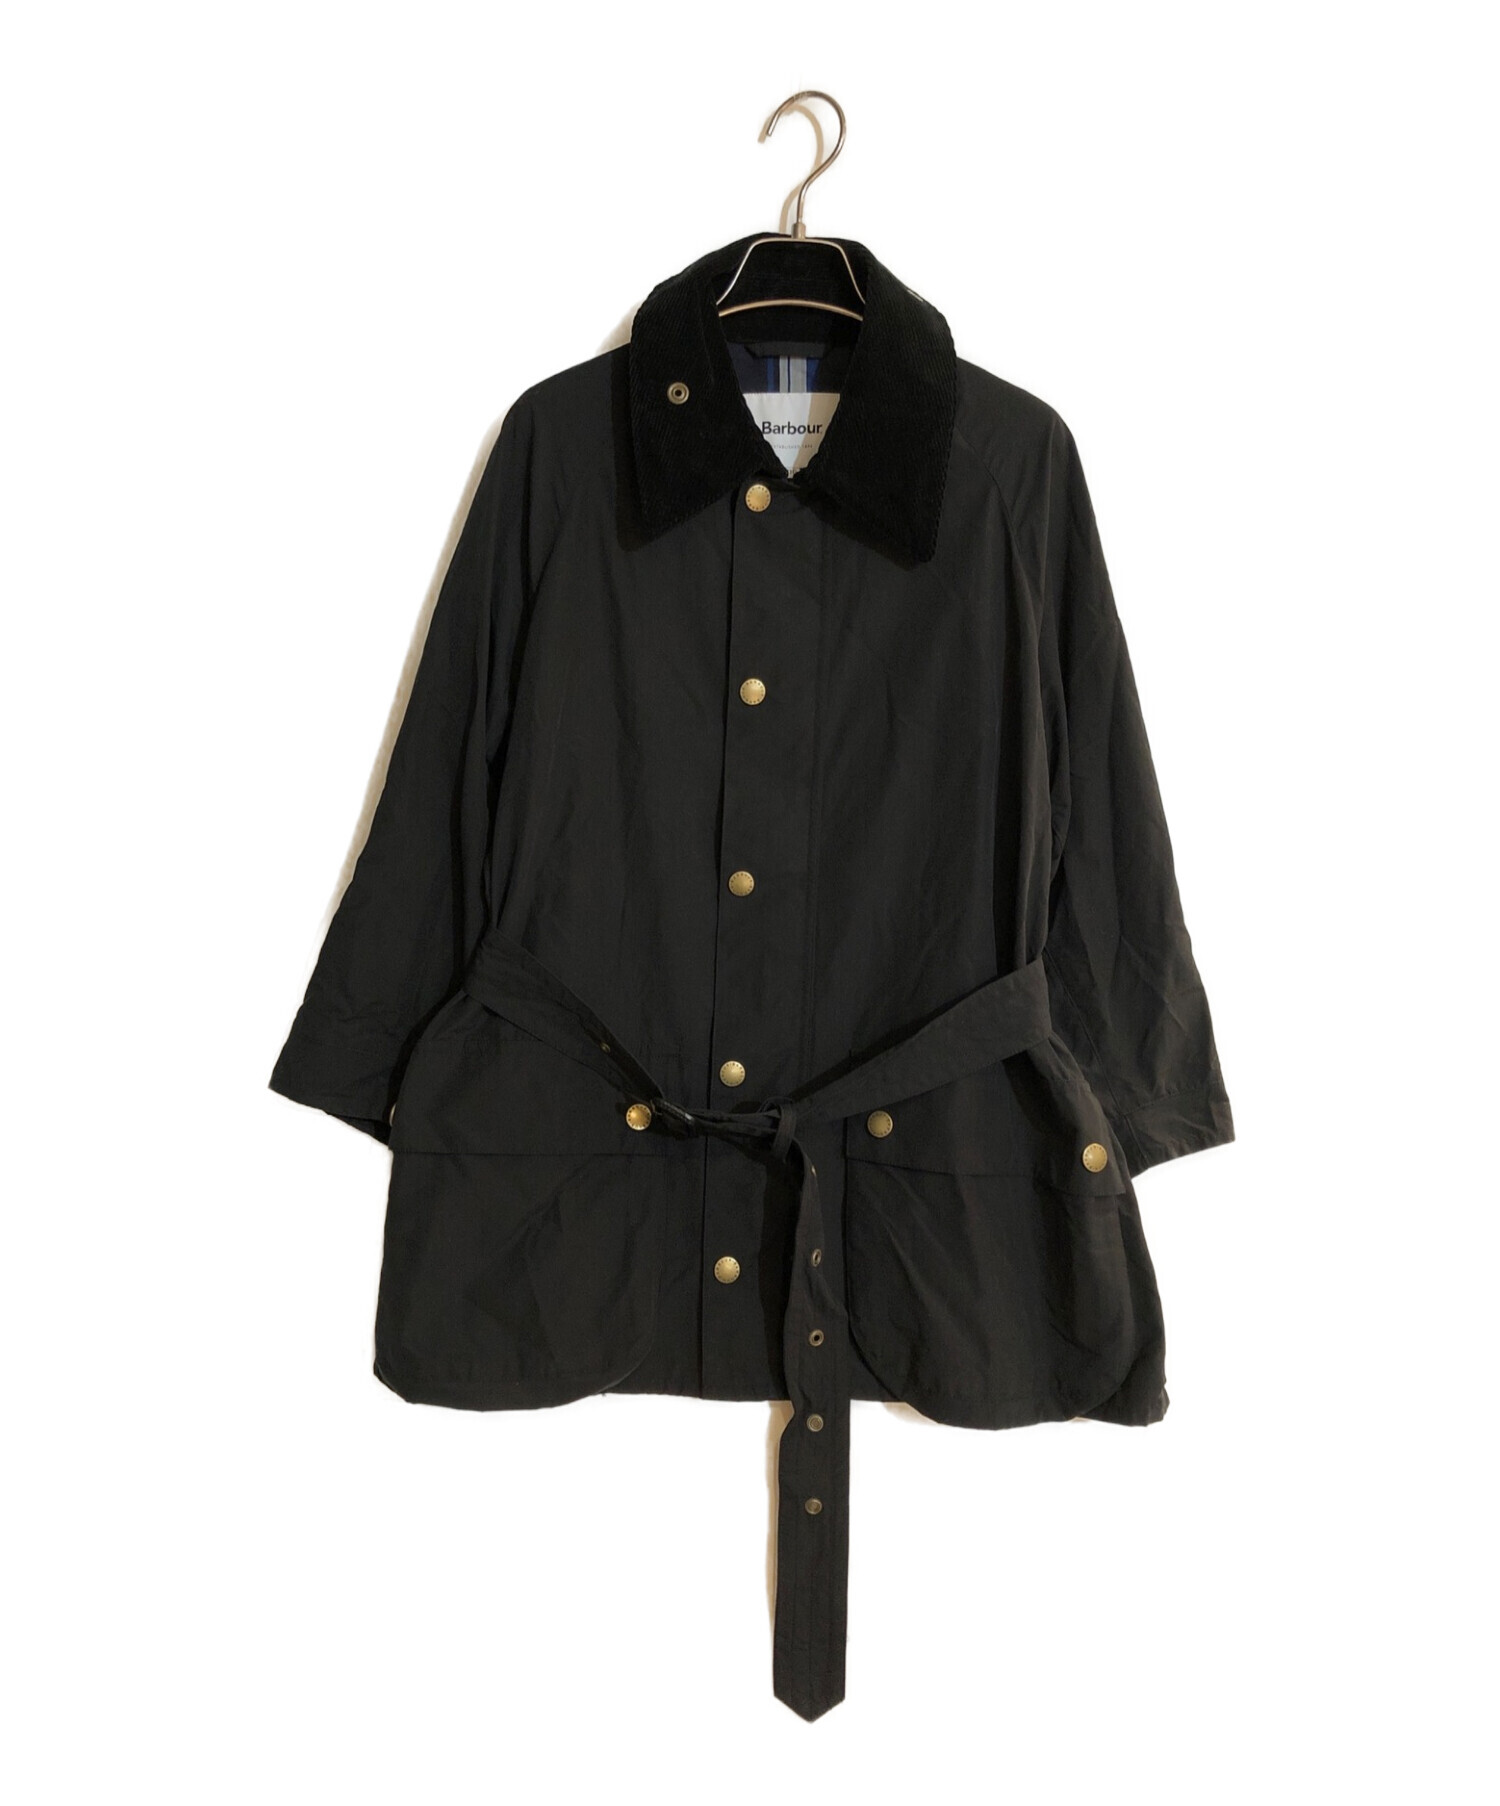 Barbour (バブアー) 別注OS BEDALE BELTED JACKET/ビデイルジャケット ブラック サイズ:36